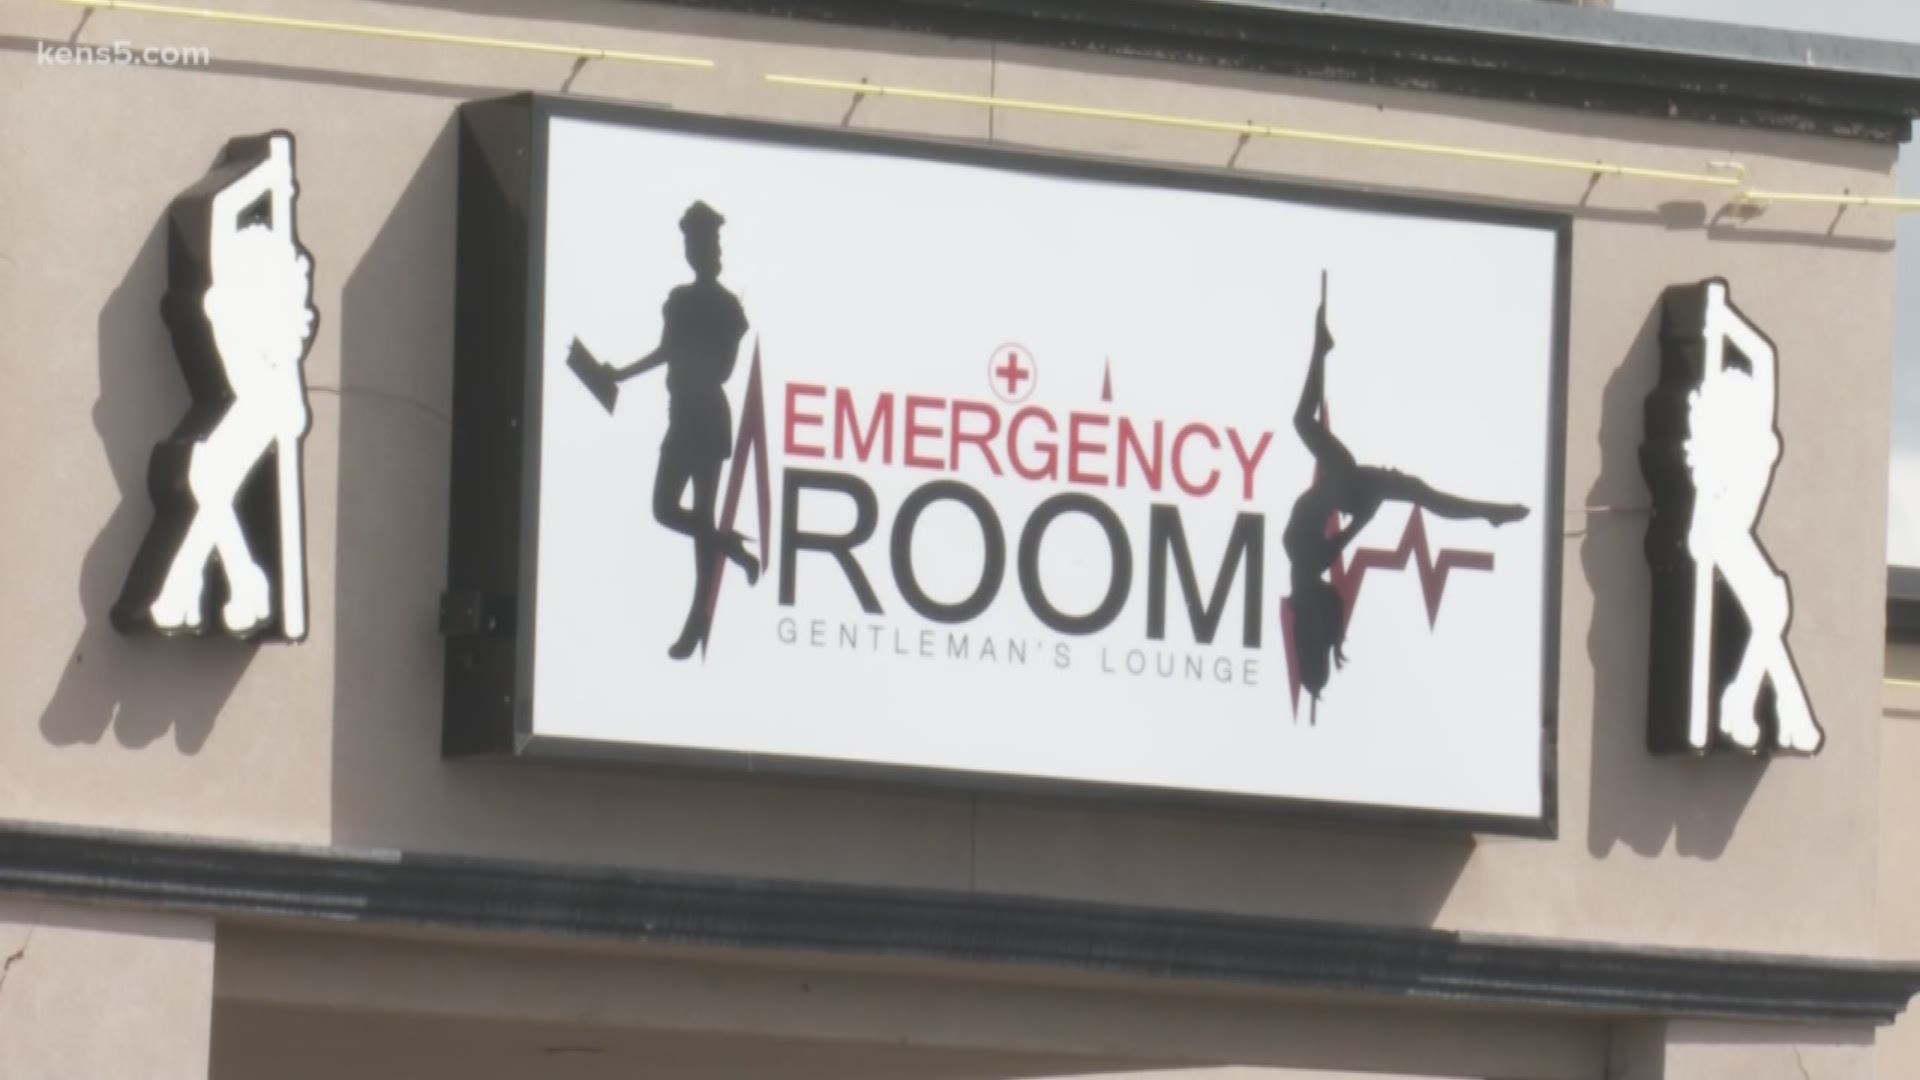 Some residents and government officials are concerned that a new San Antonio strip club called "Emergency Room" could cause confusion.